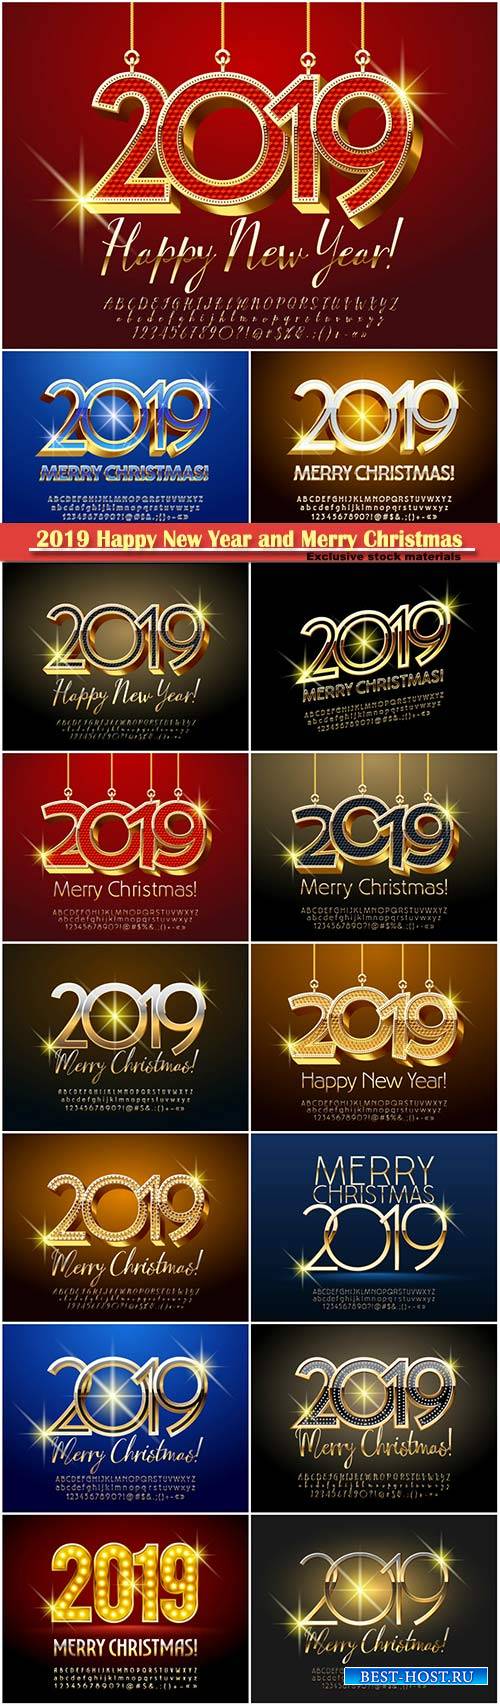 2019 Happy New Year and Merry Christmas design decorative